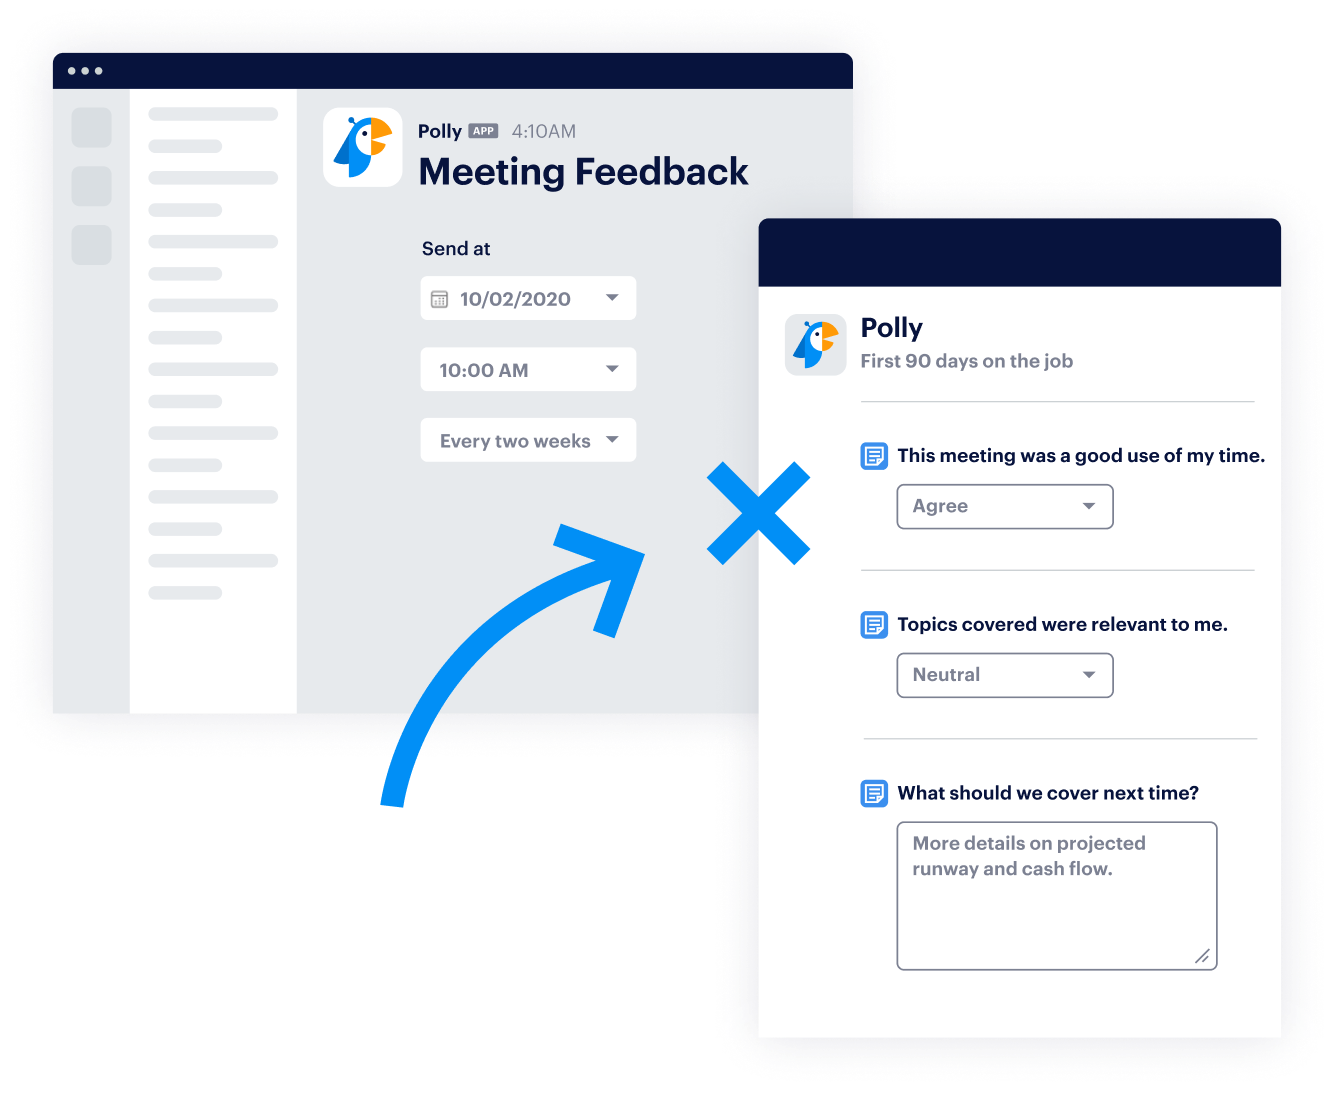 control panel to schedule an automatic meeting feedback questionnaire